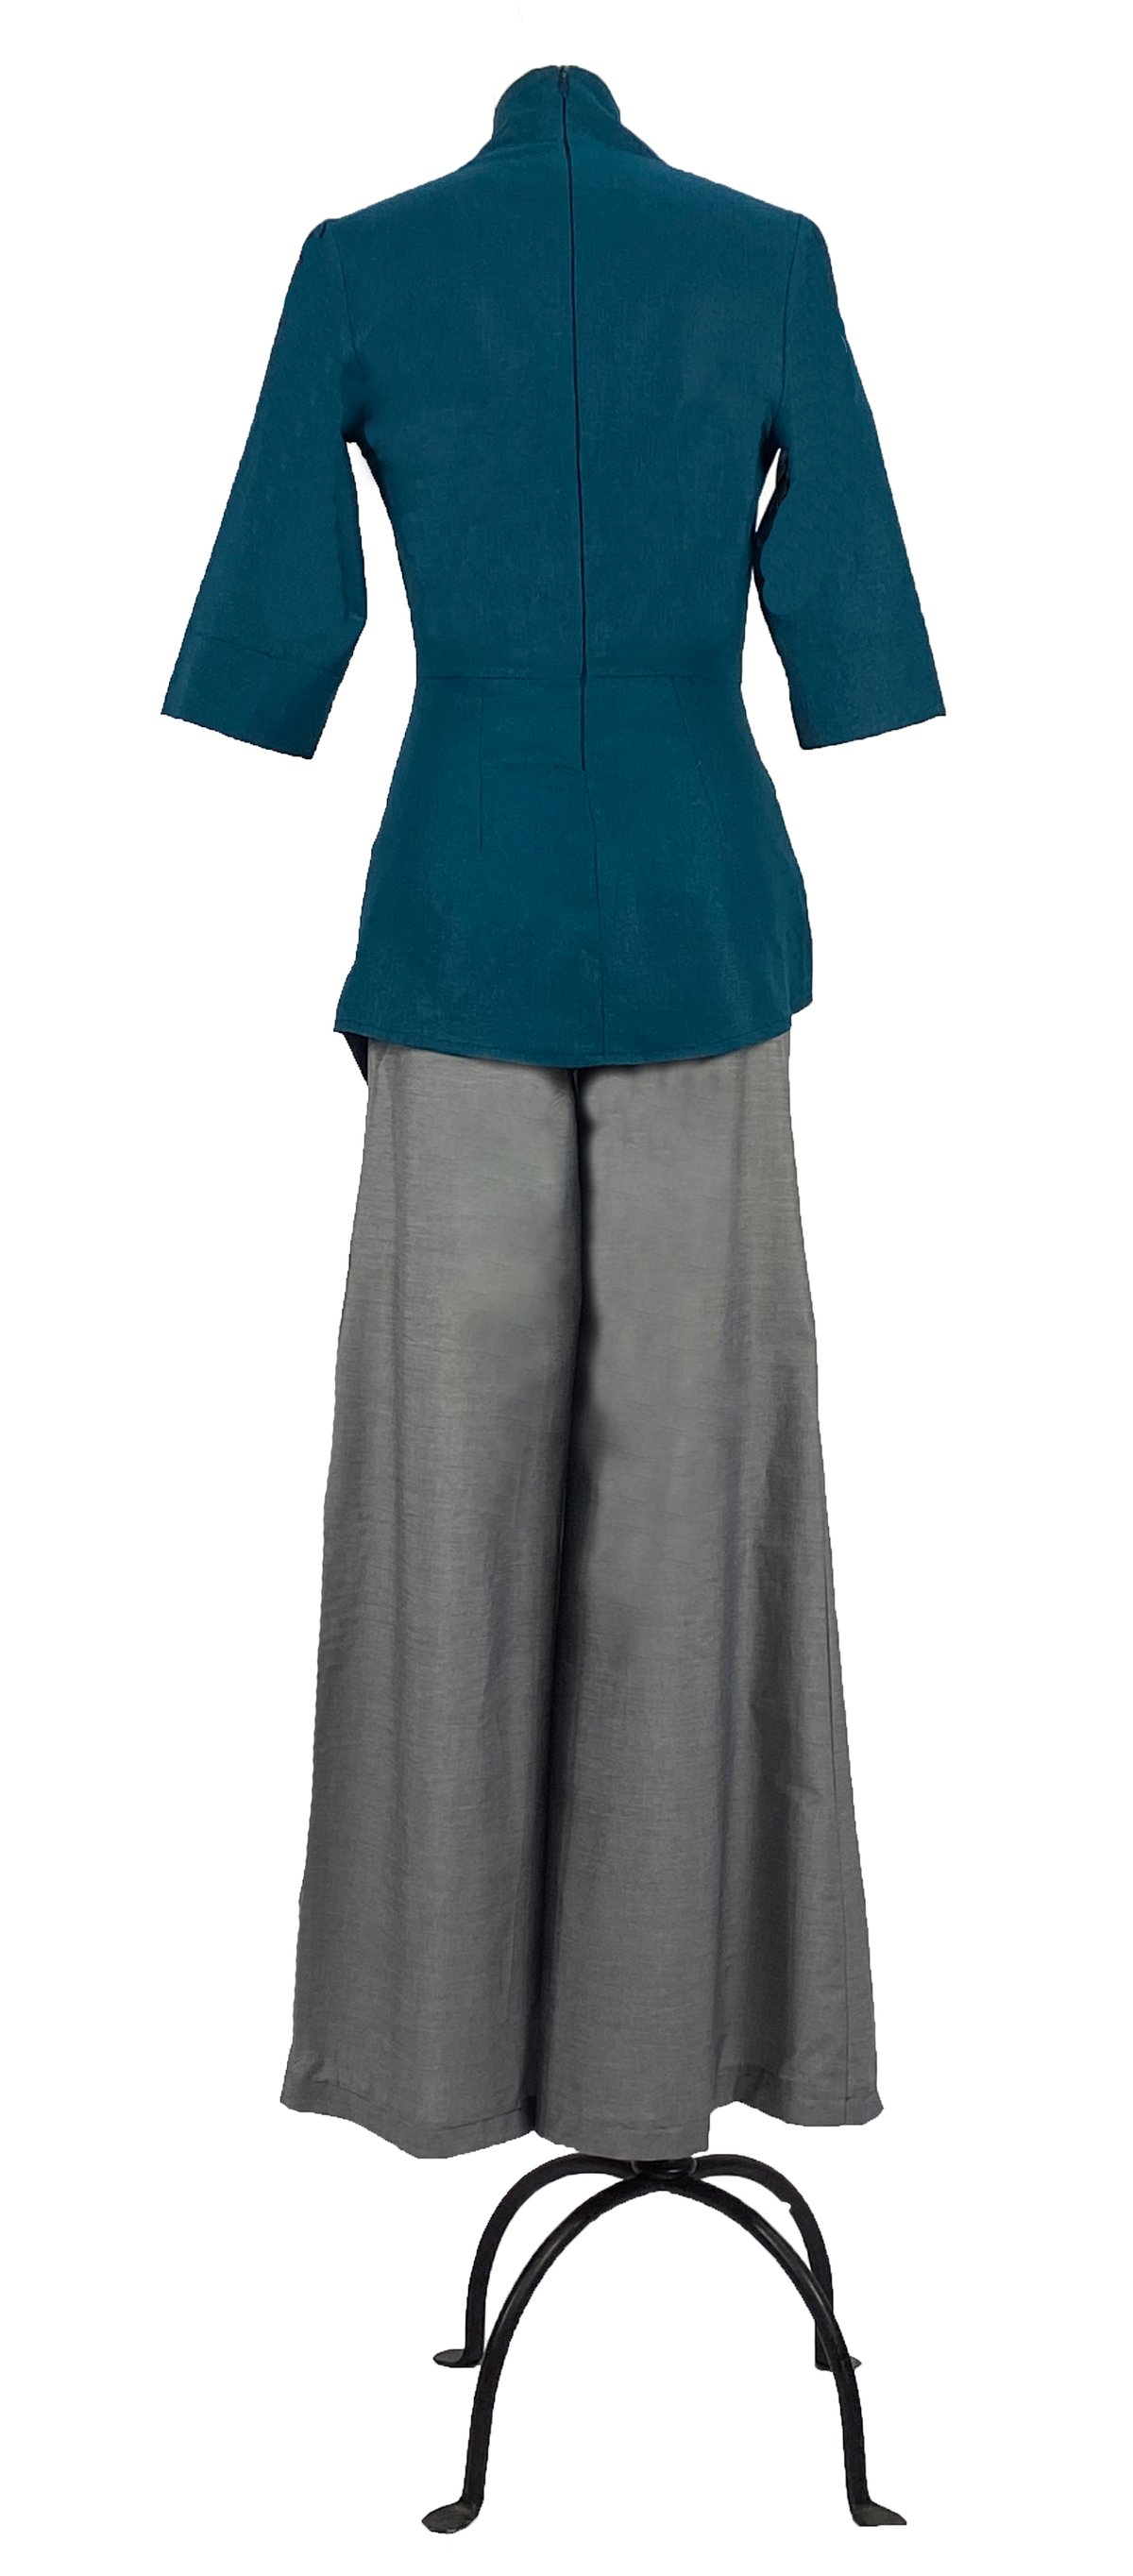 Image of Elmira Cromwell top in teal